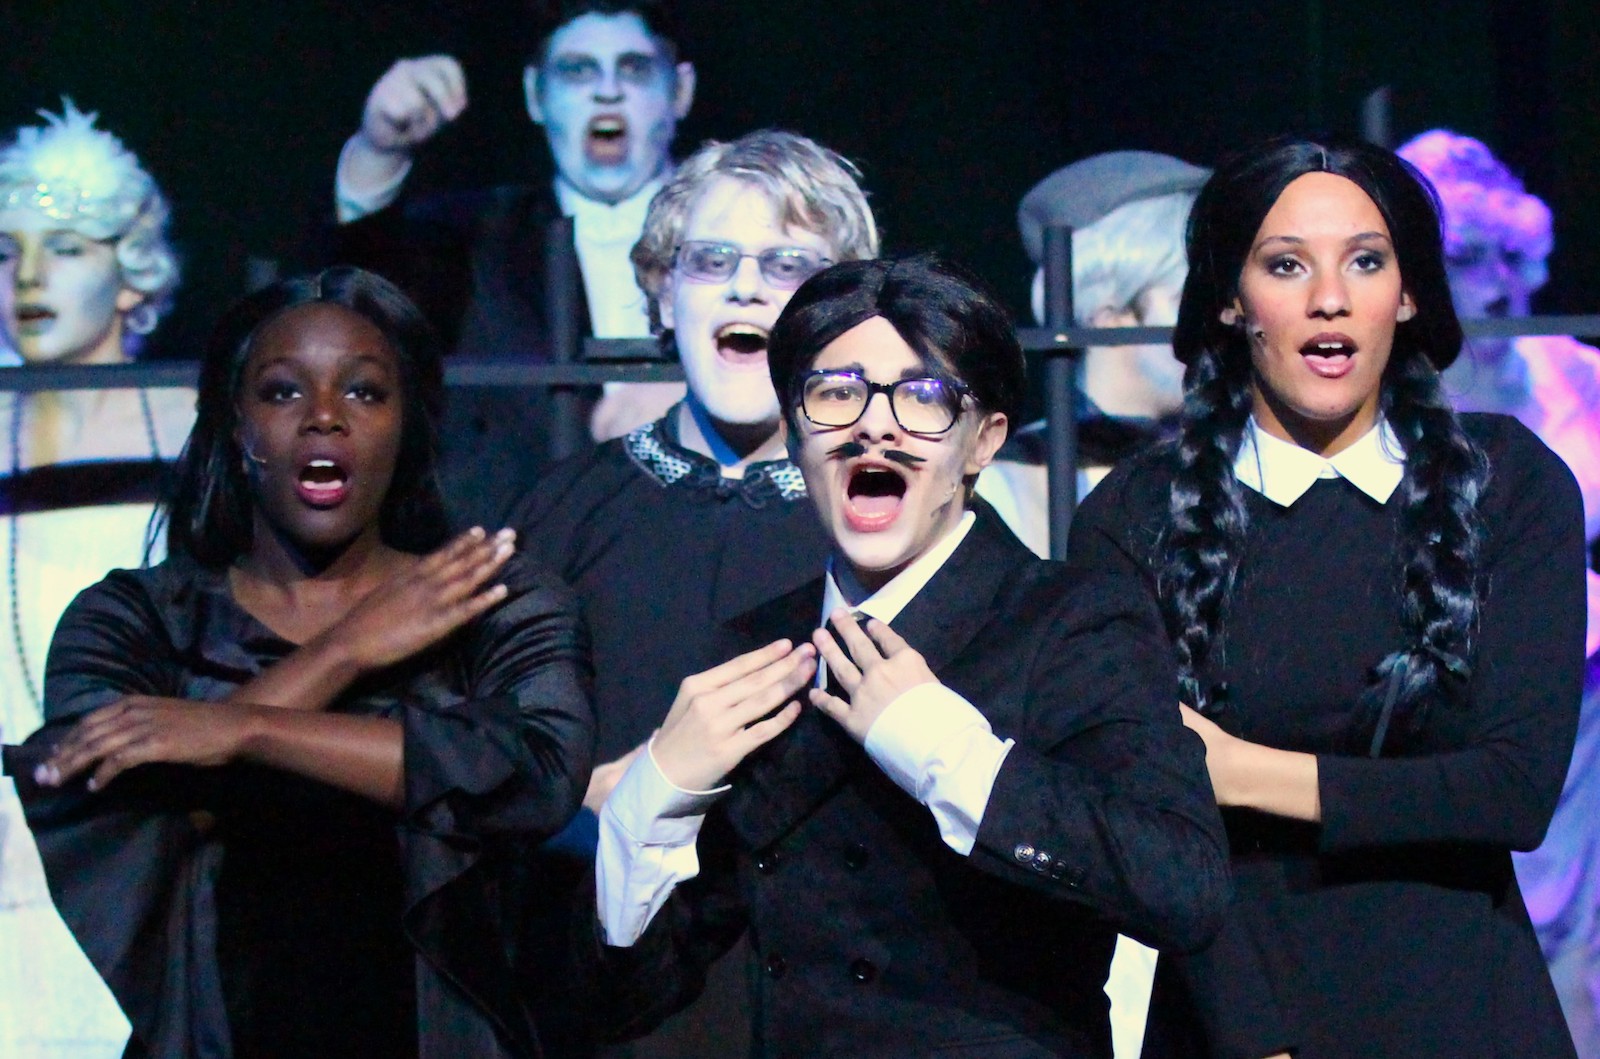 Students perform in the Addams Family musical at Pickerington High School Central